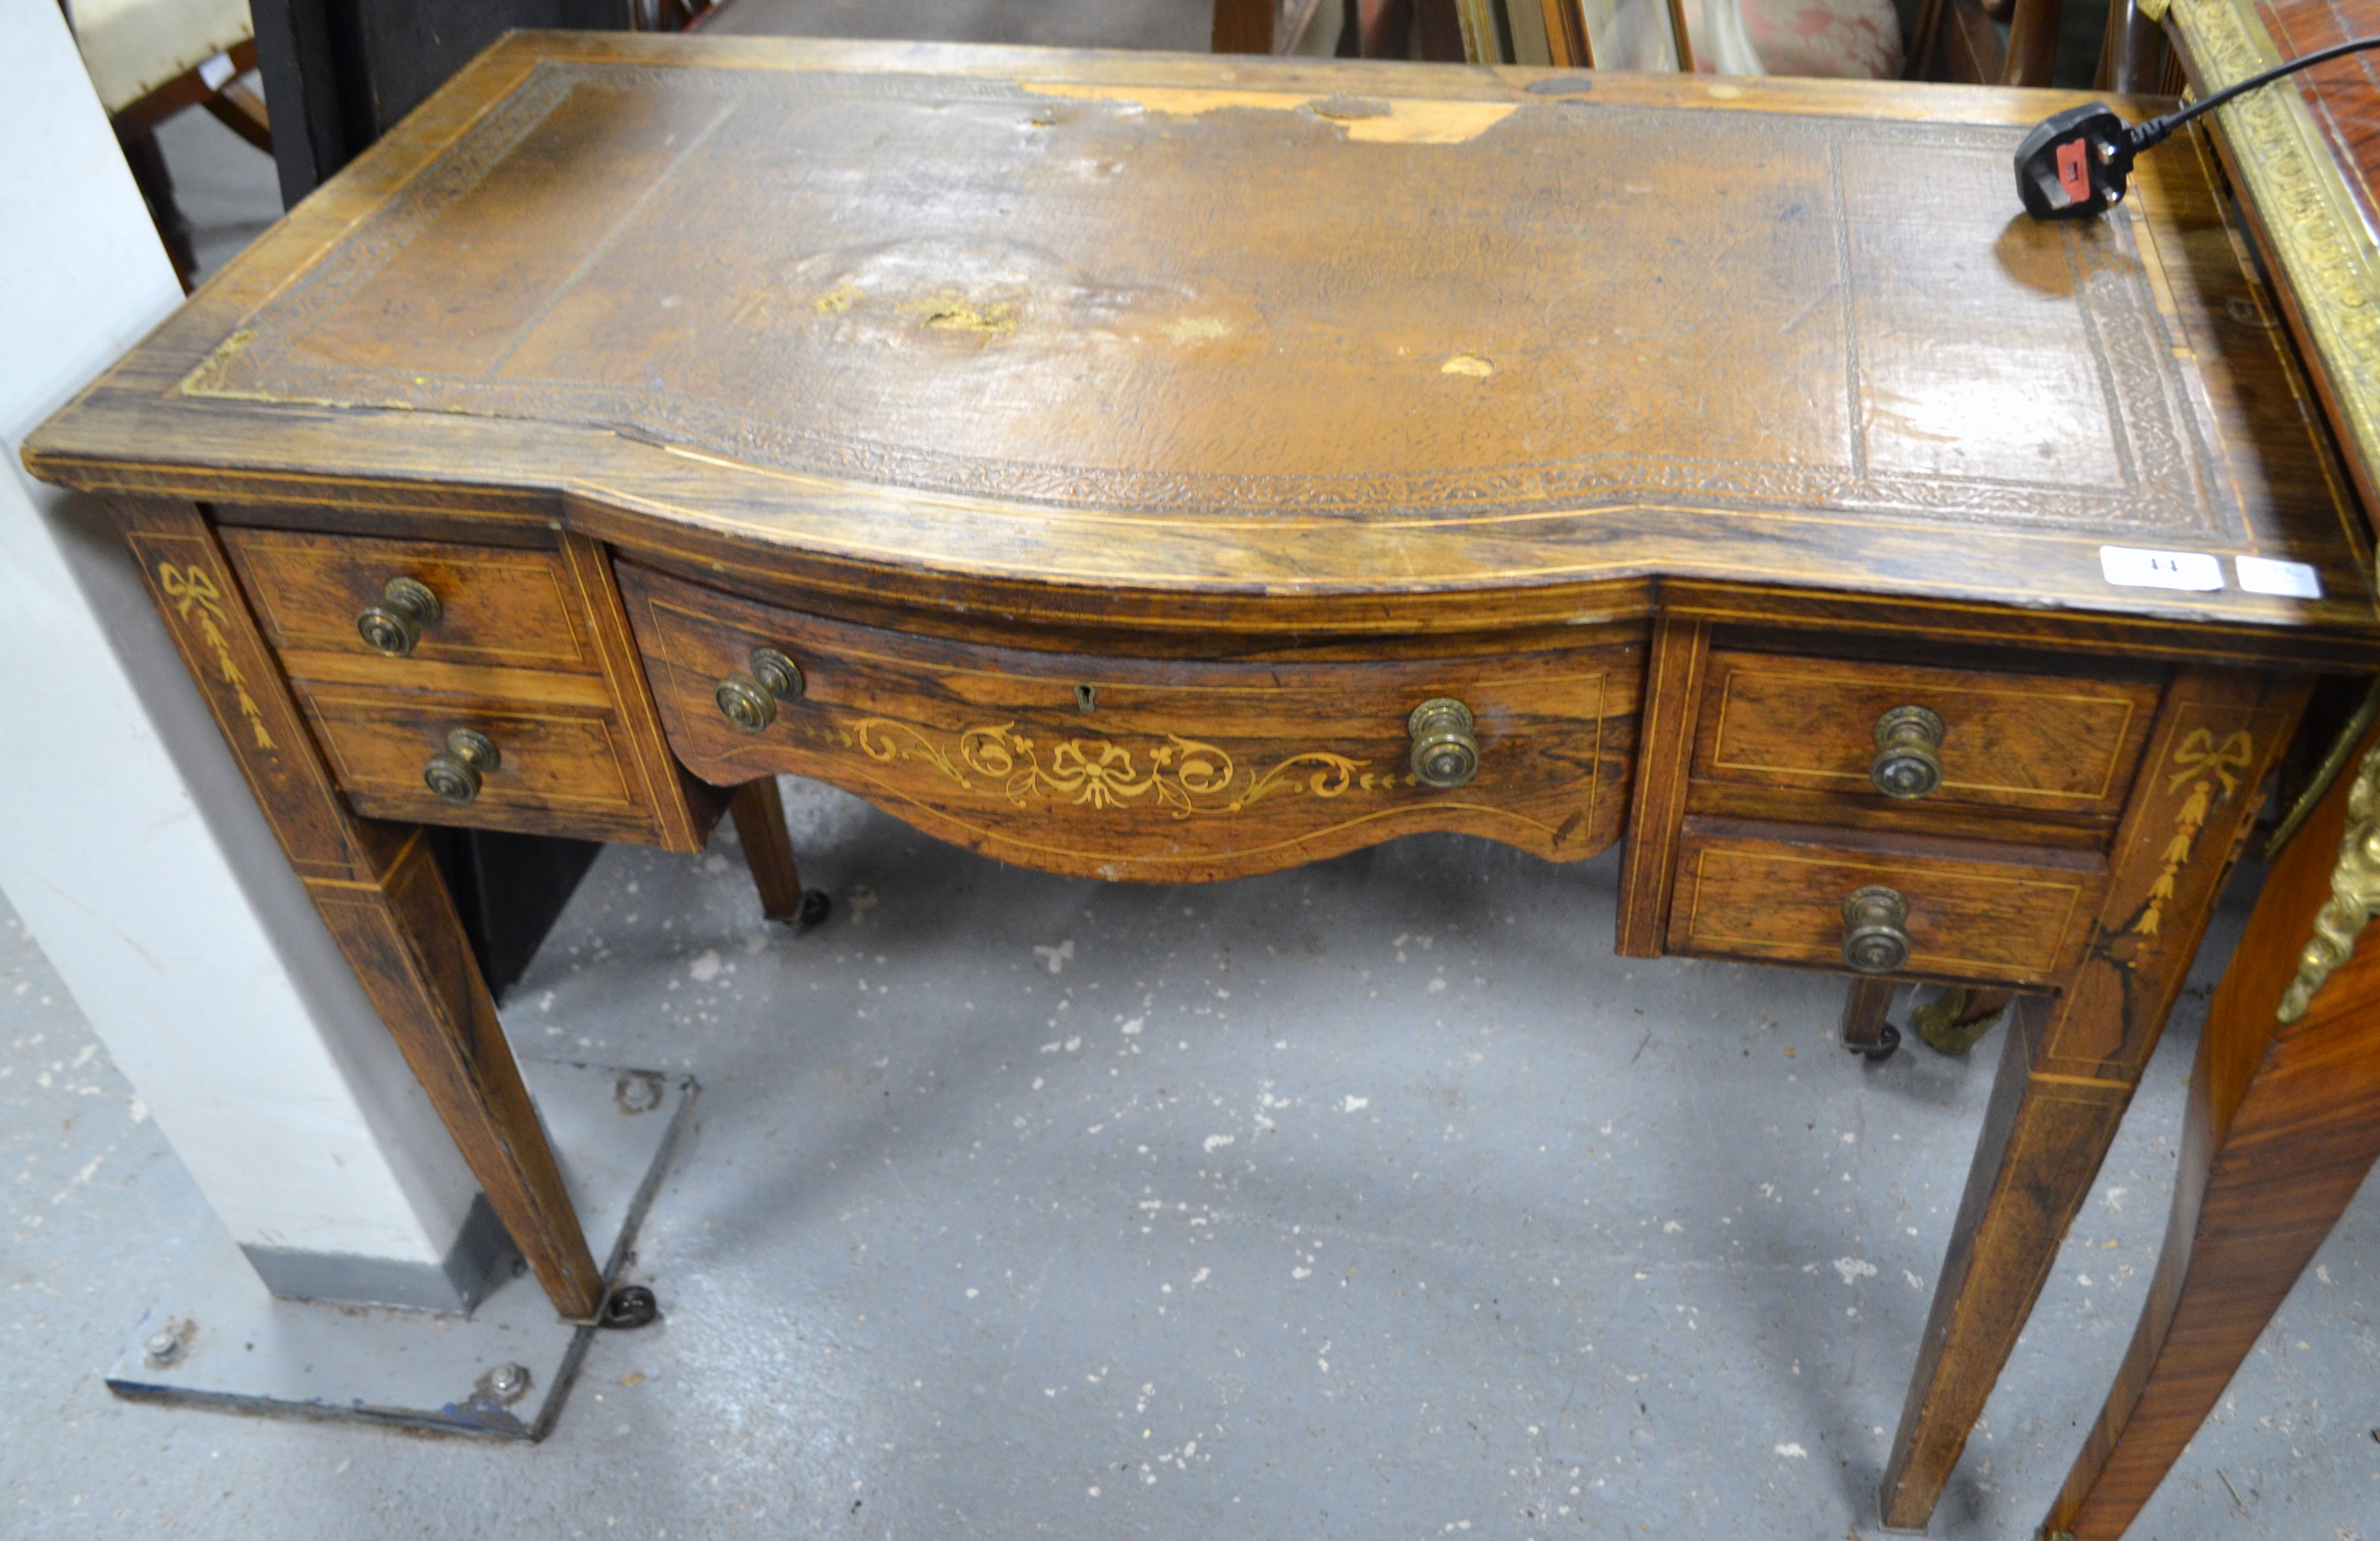 Late 19th century rosewood and inlaid shaped front desk with central drawer and two drawers to